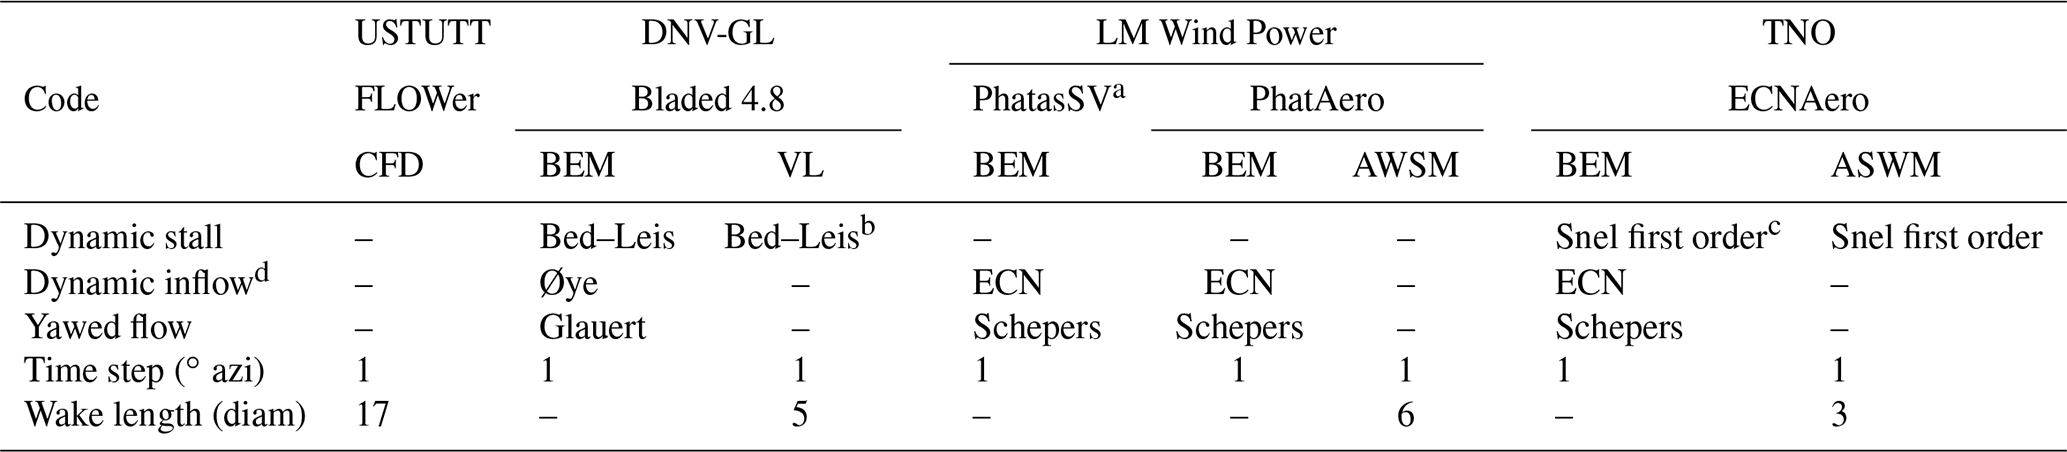 Wes Validation And Accommodation Of Vortex Wake Codes For Wind